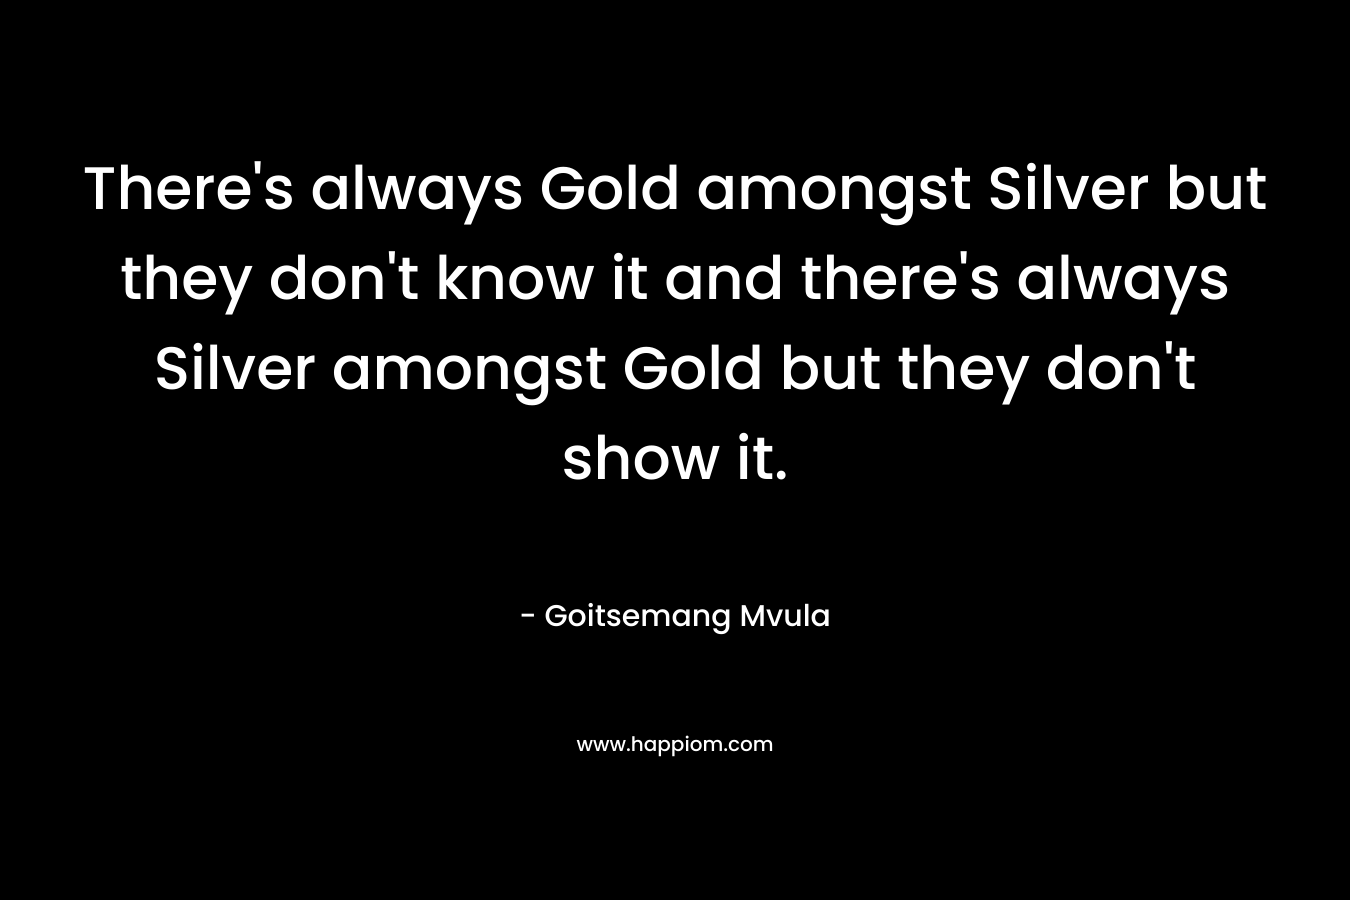 There's always Gold amongst Silver but they don't know it and there's always Silver amongst Gold but they don't show it.